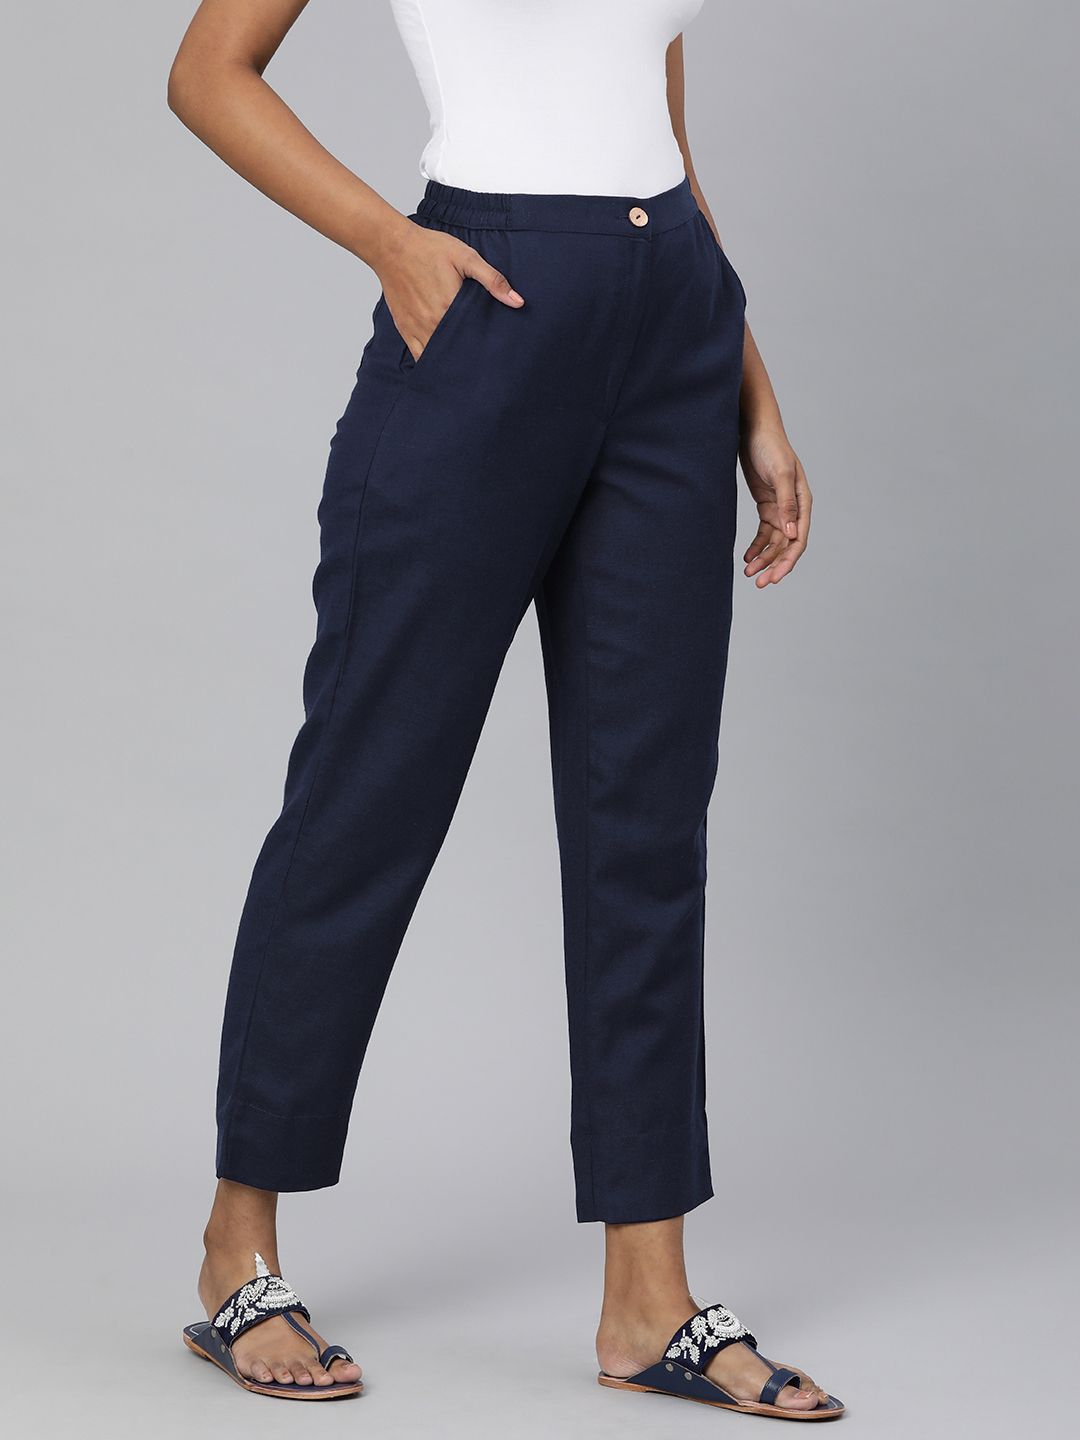 Global Desi Women Navy Blue Solid Straight Fit Trousers Price in India